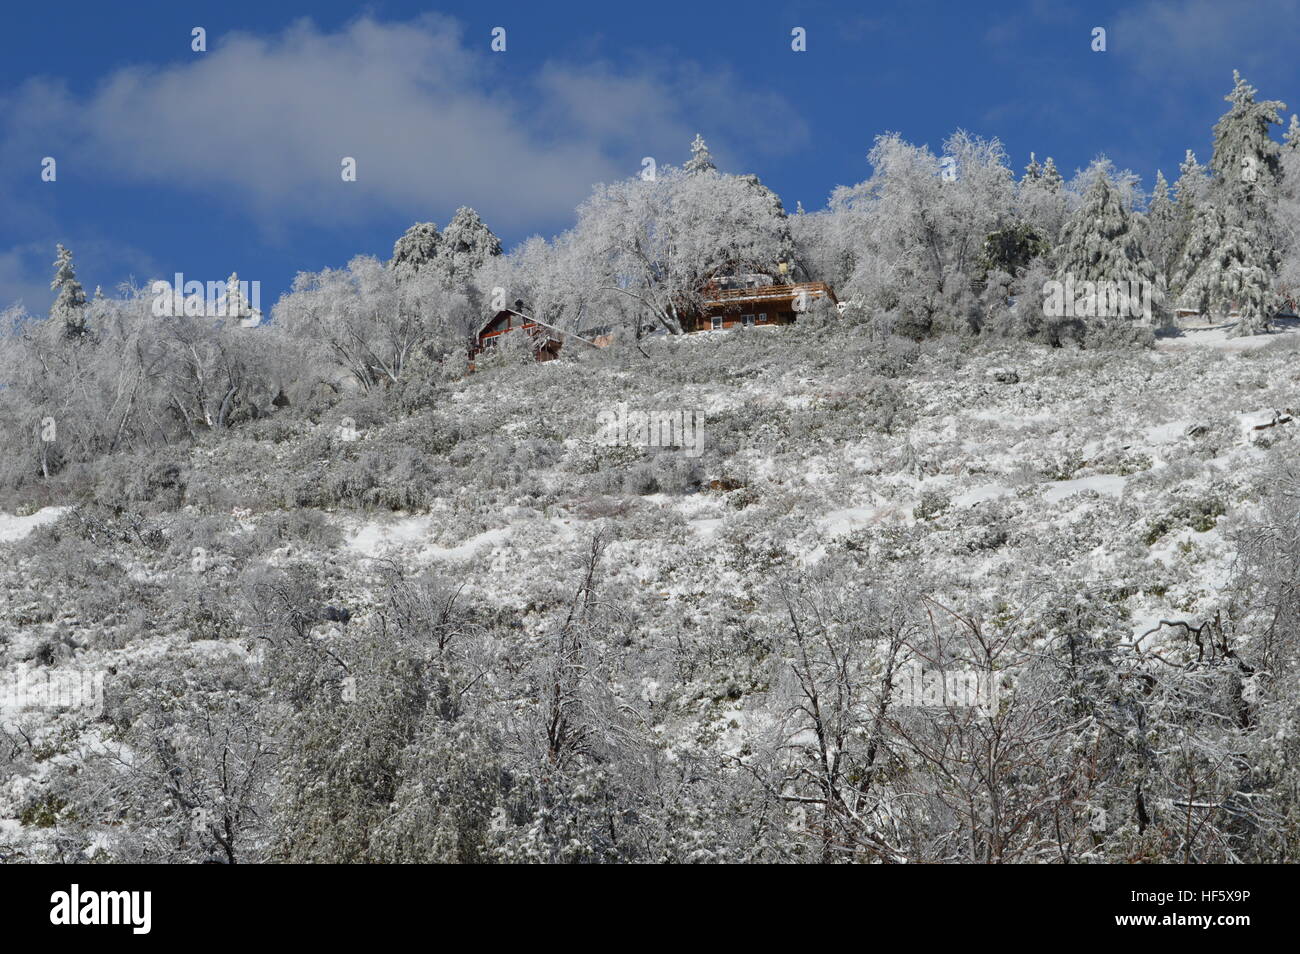 House on mountain top in snow Stock Photo